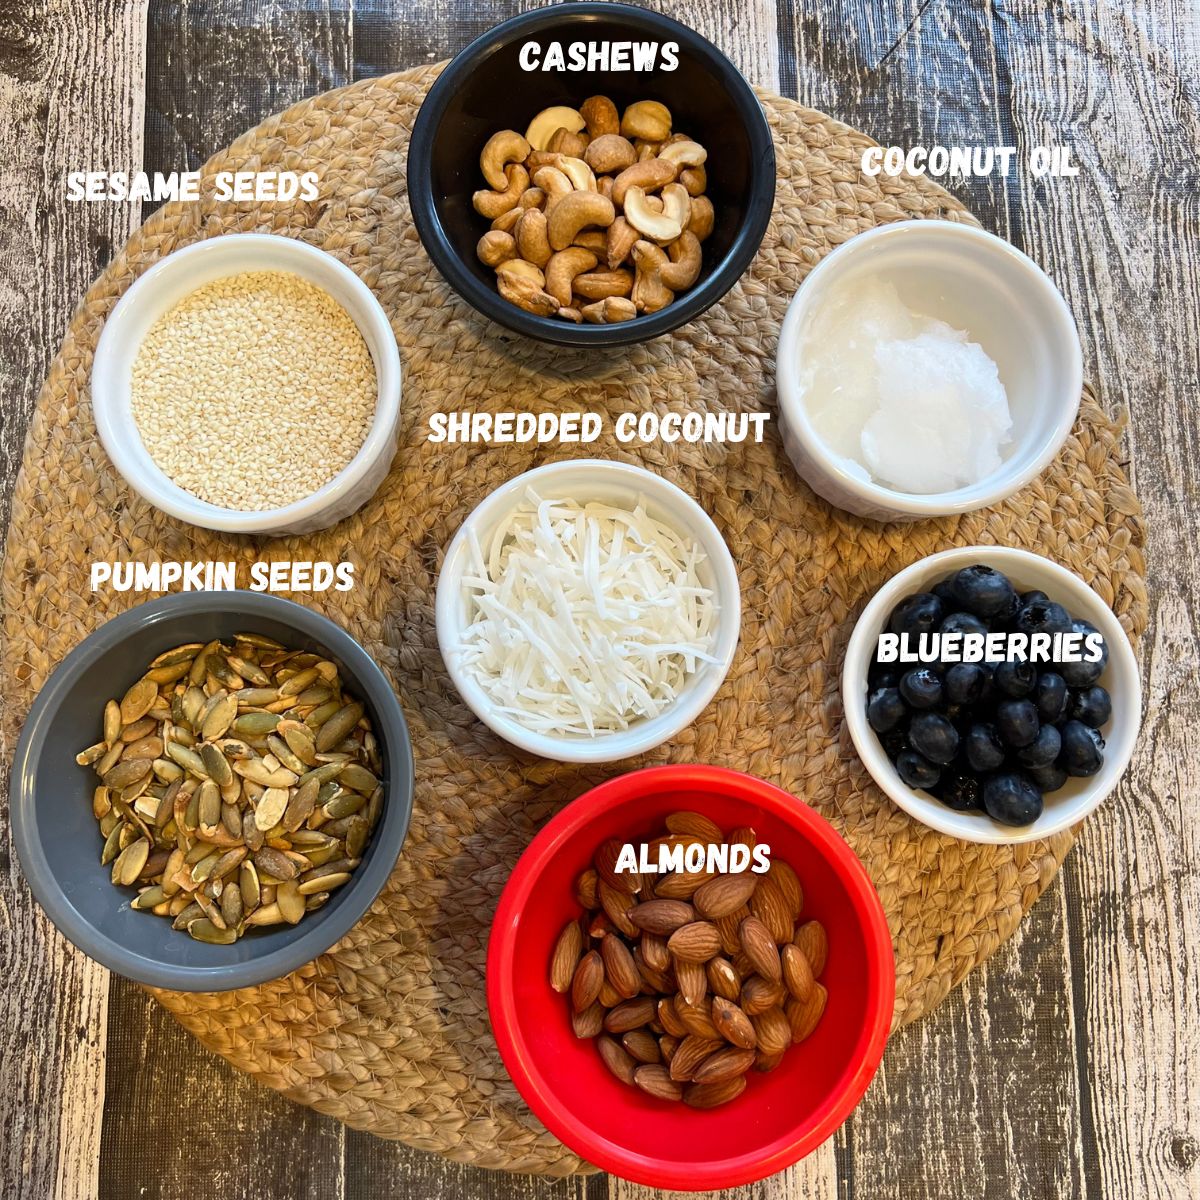 Homemade granola ingredients - sesame seeds, cashews, coconut oil, pumpkin seeds, coconut flakes, blueberries and almonds in small bowls